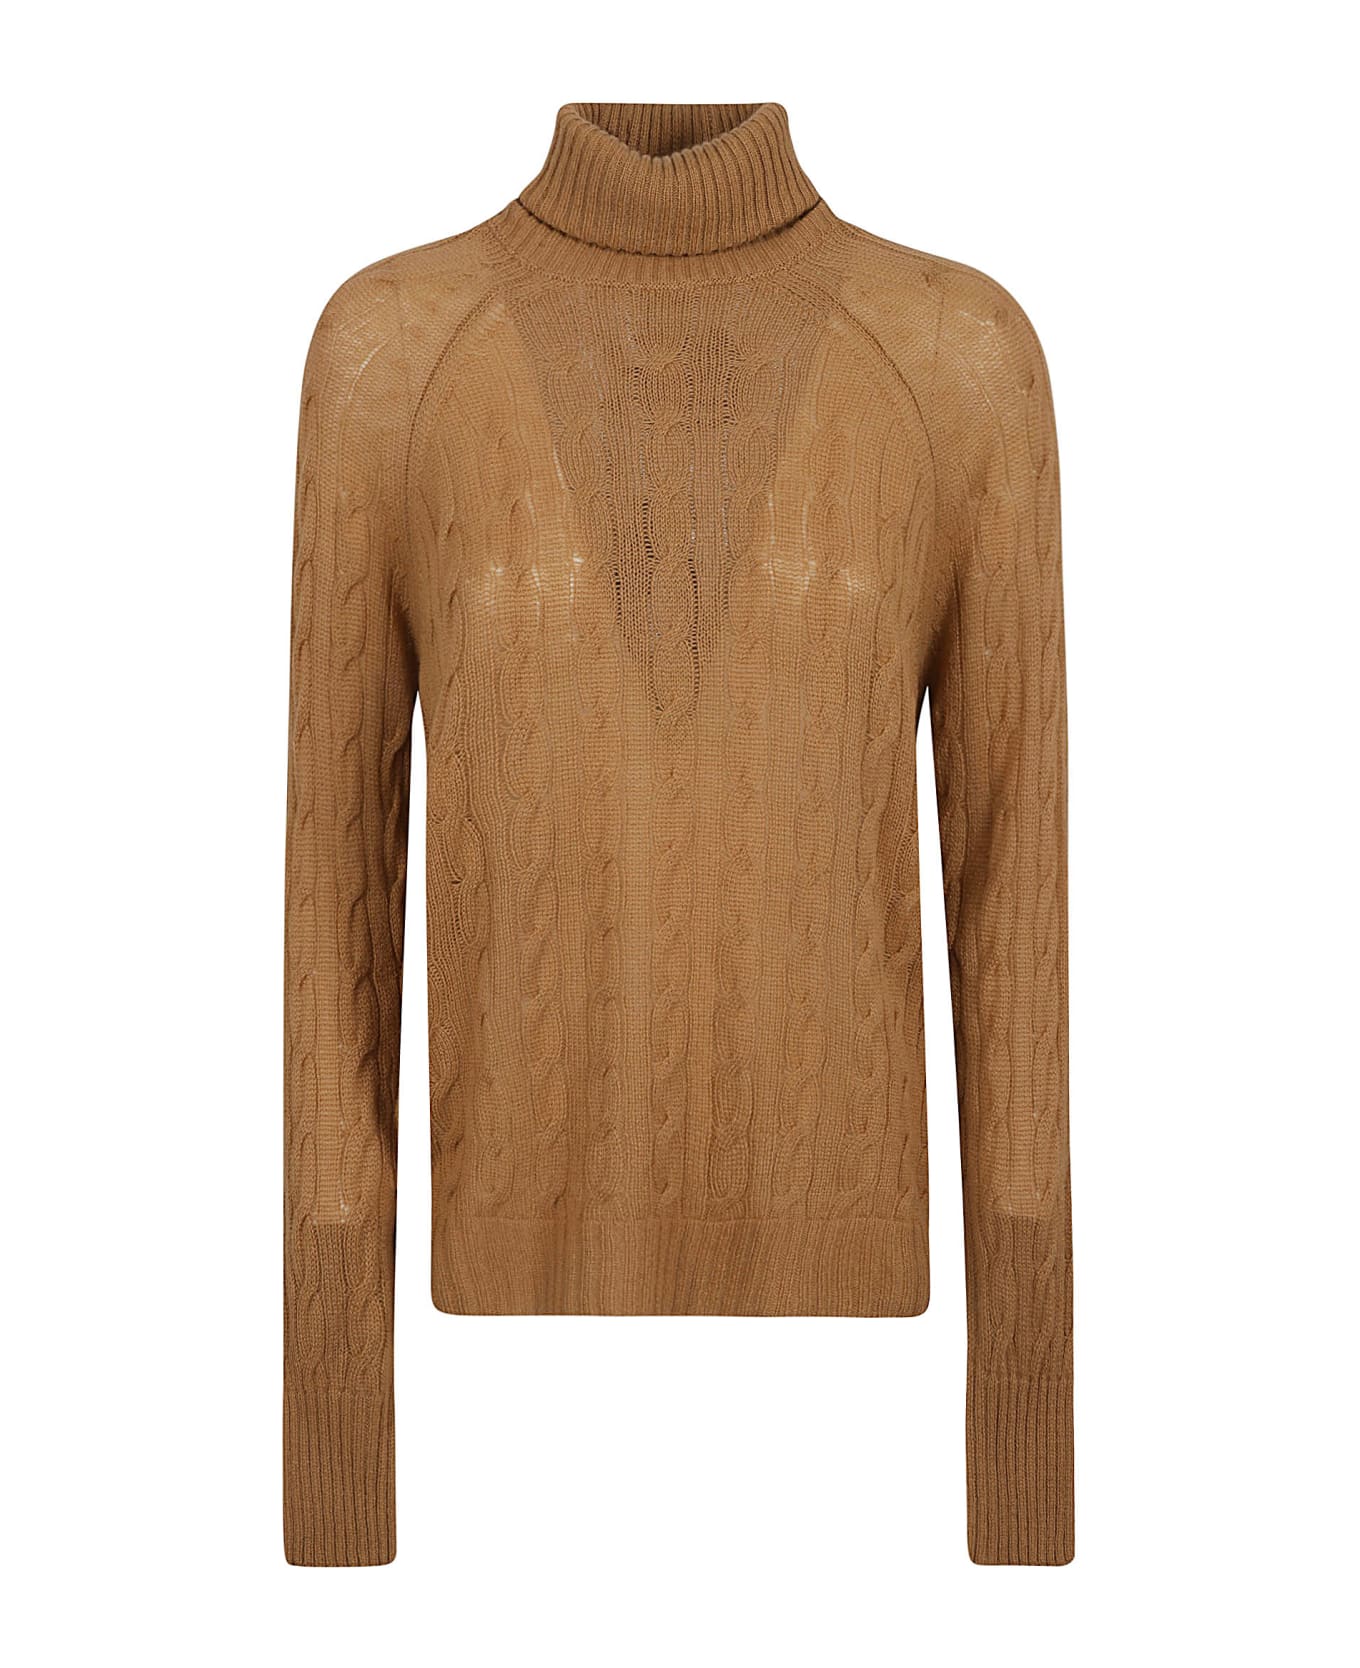 Etro Turtleneck Cable-knit Sweater - Beige